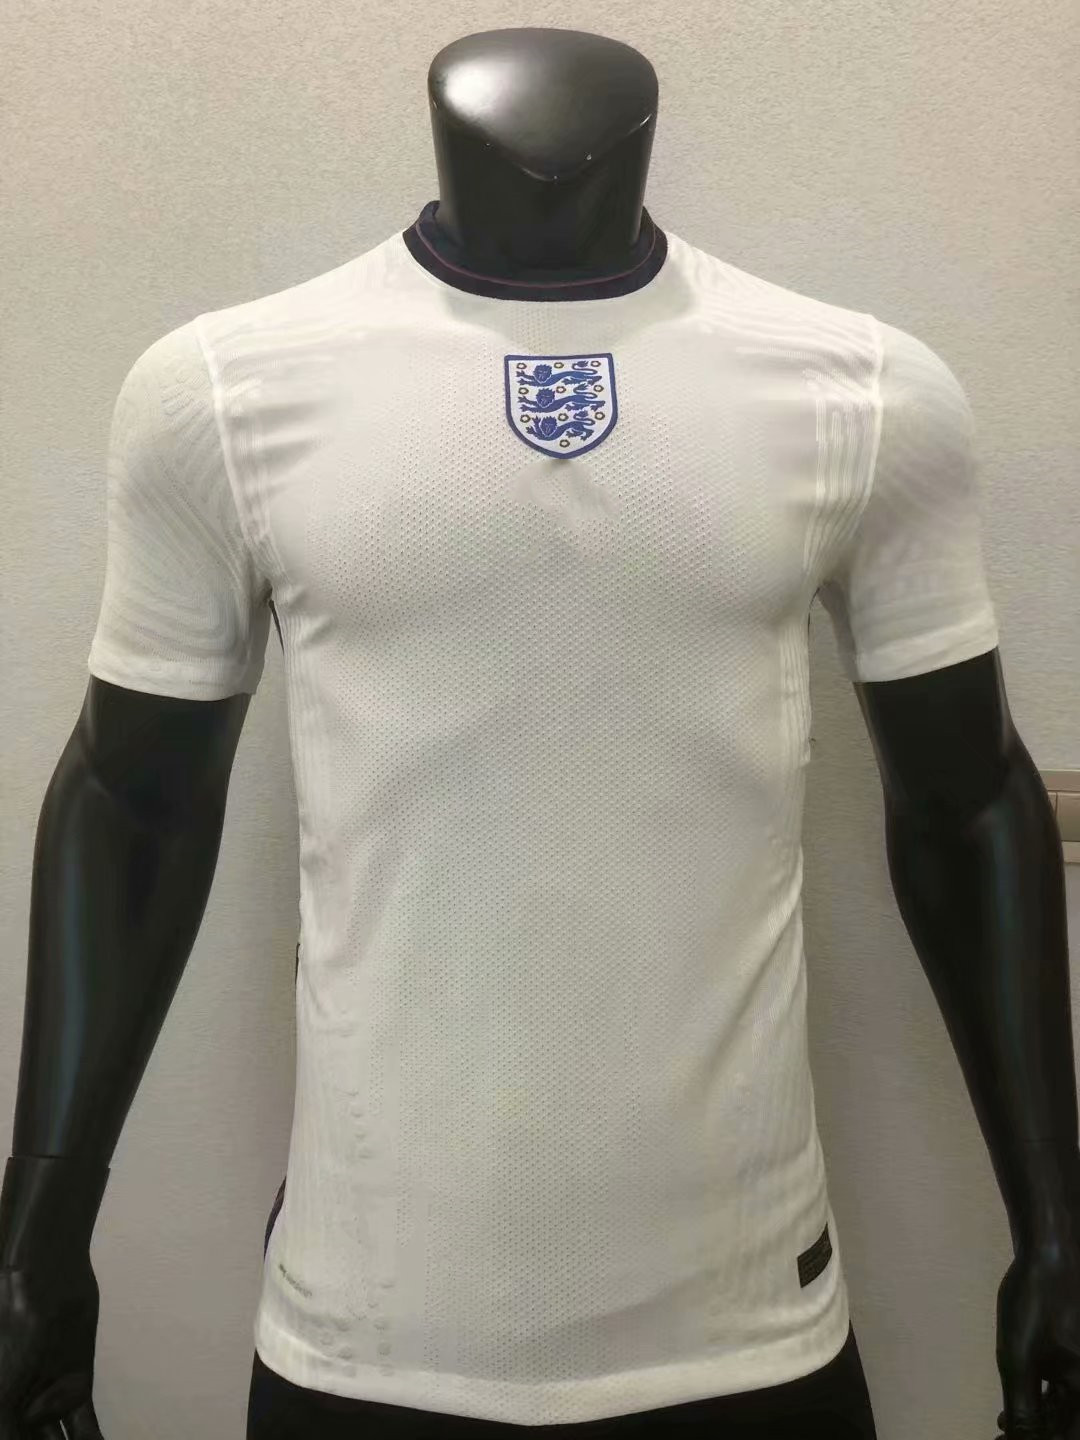 2020-2021 Adult New Top players Shirt England home white ...